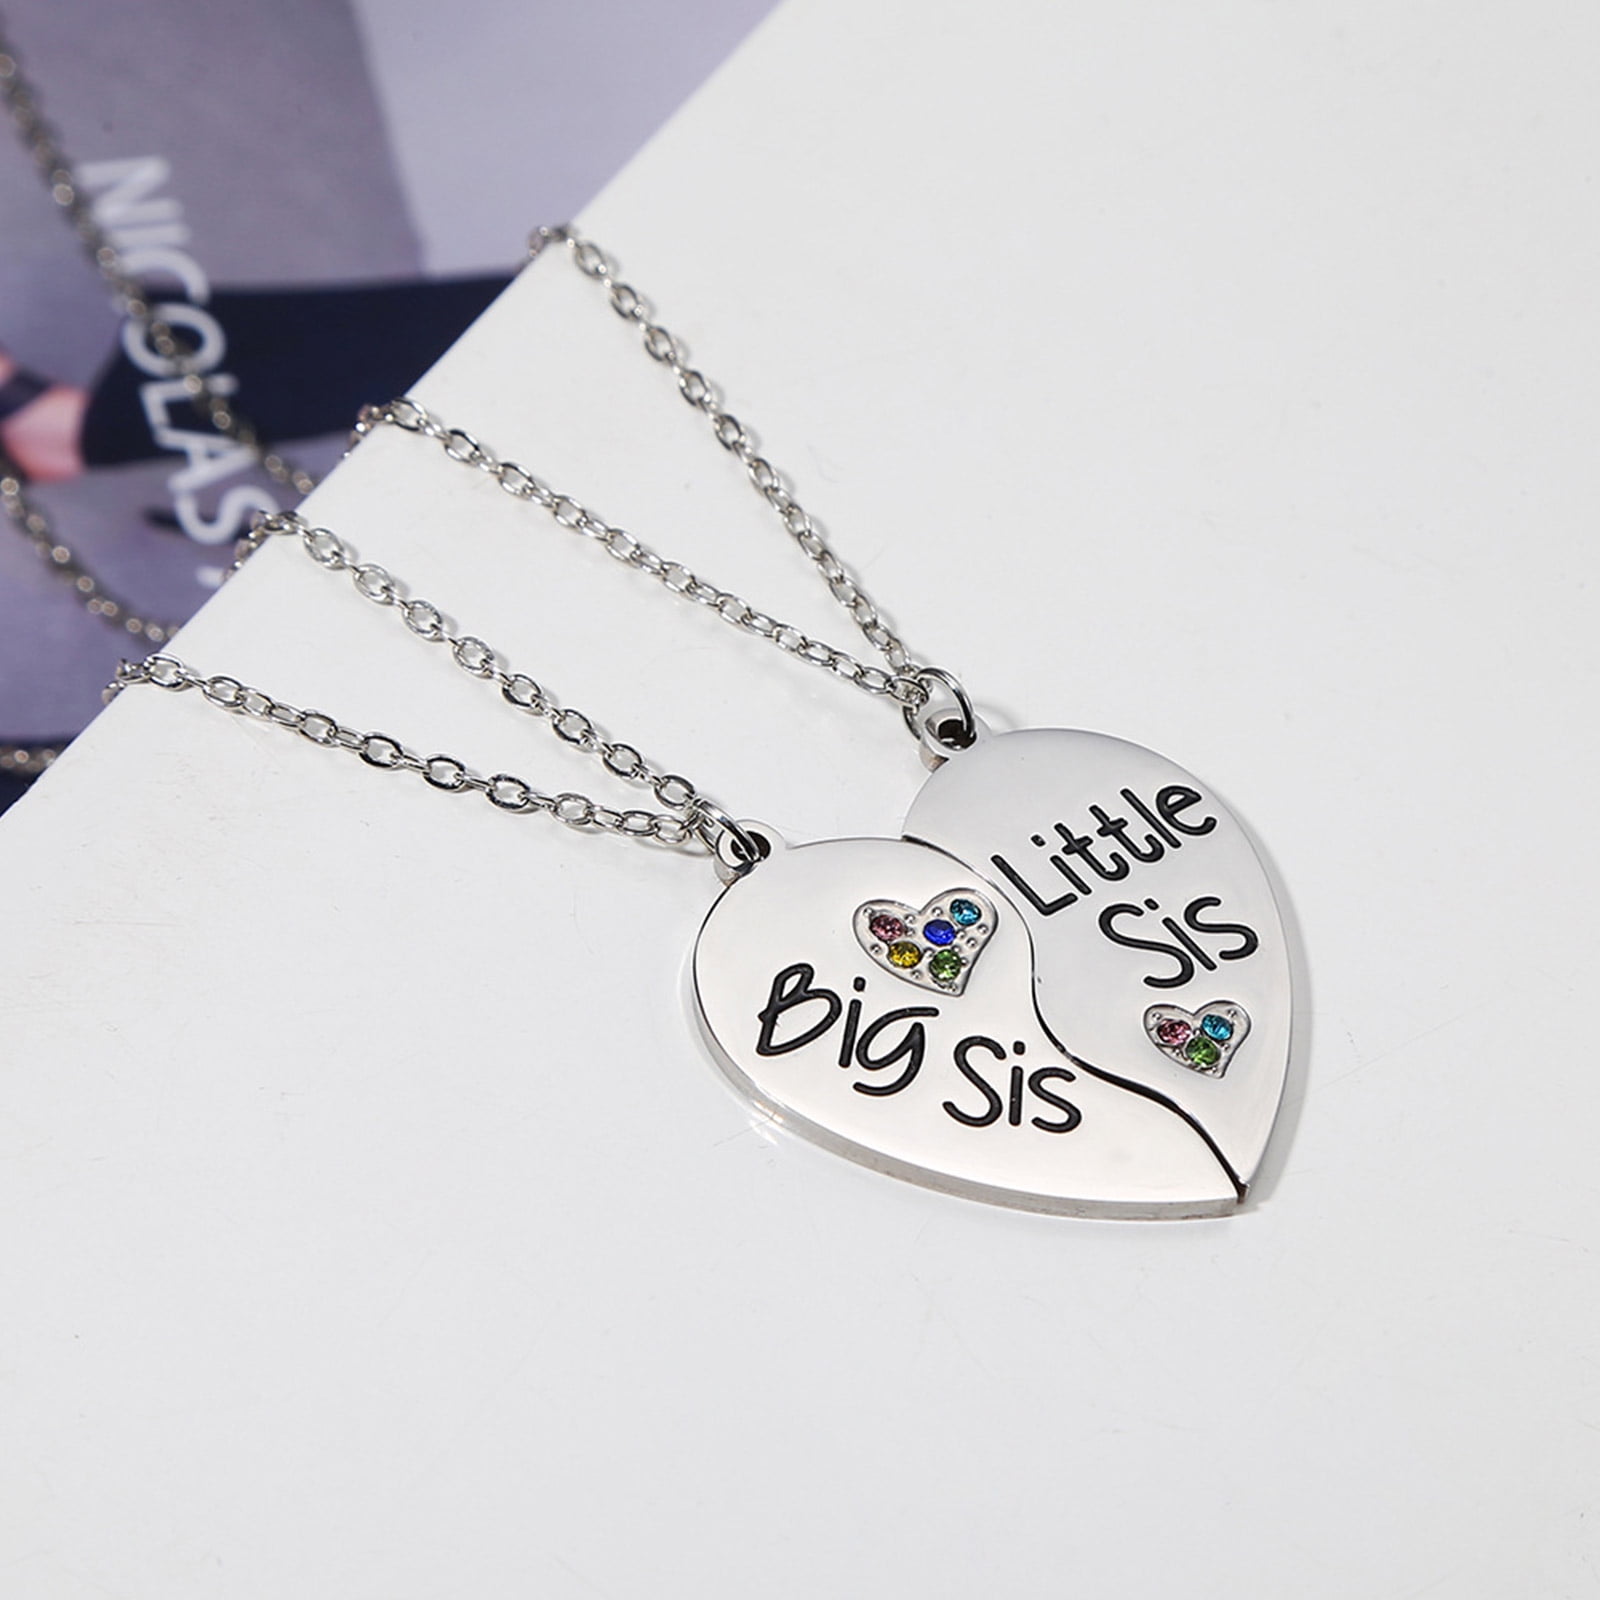 Big Sis Middle Sis Little Sis Necklace Set [Personalized] | FARUZO